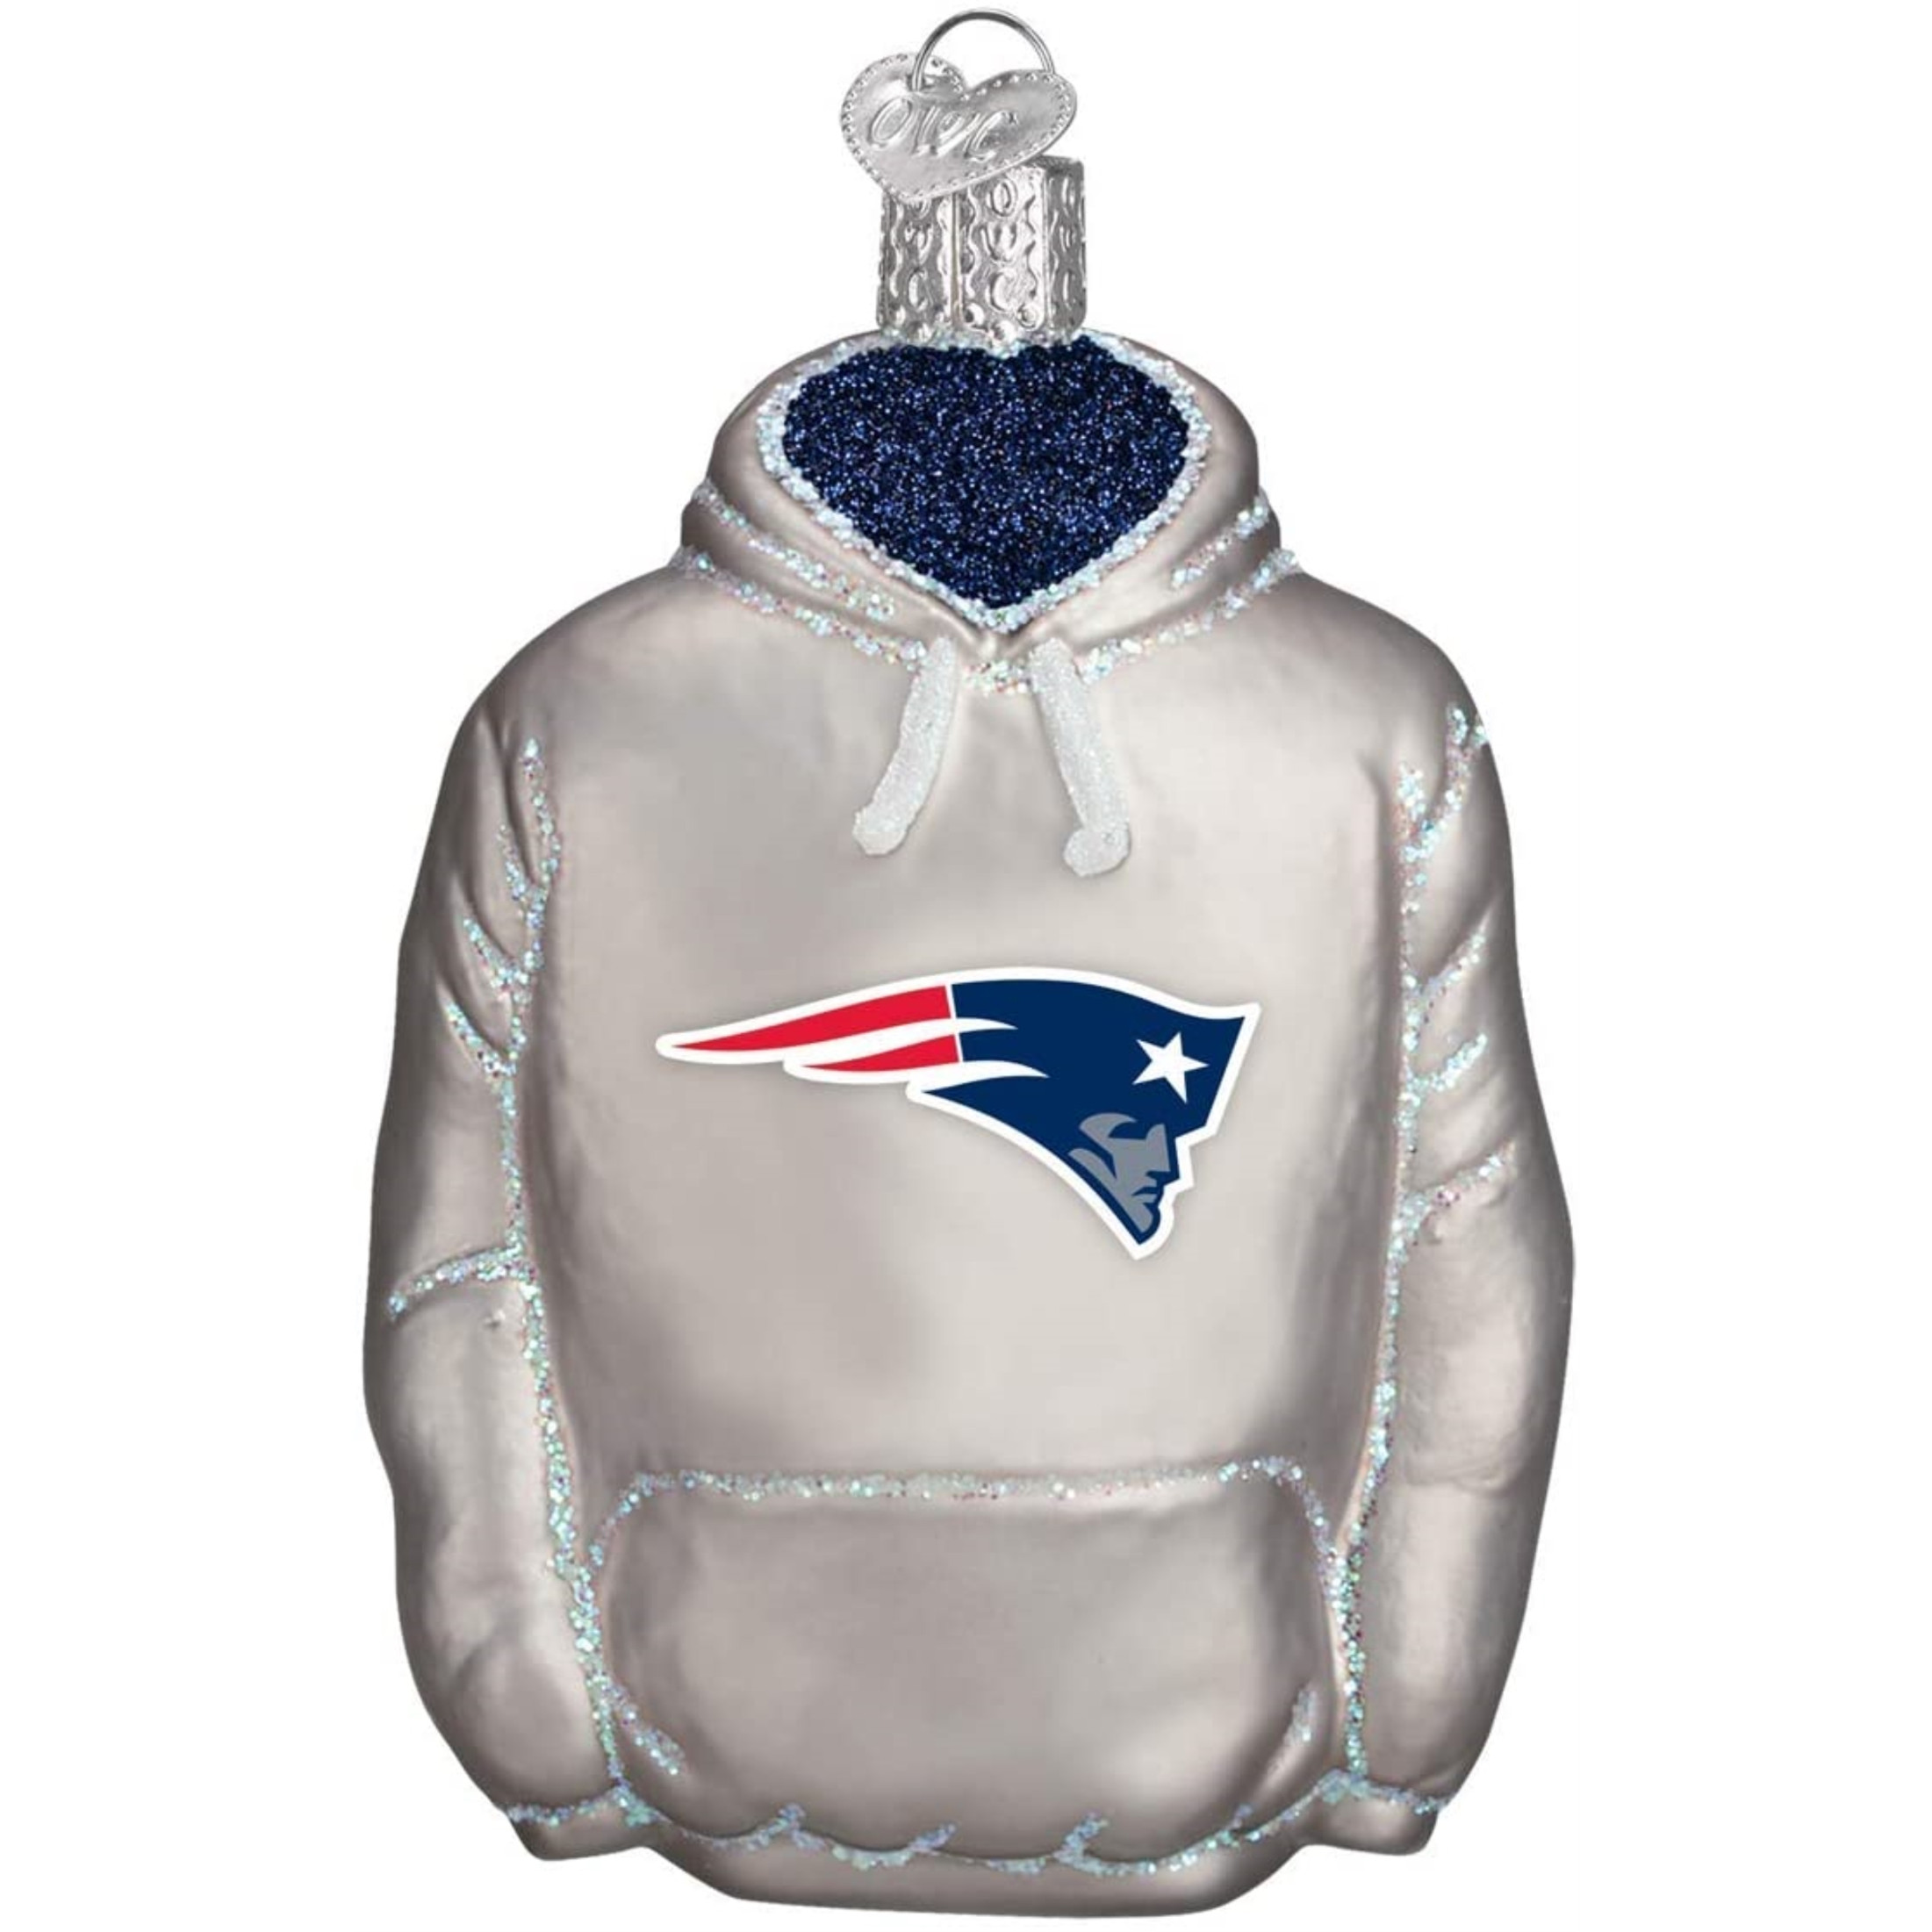 Old World Christmas Glass Blown Ornament For Christmas Tree, New England Patriots Hoodie (With OWC Gift Box)